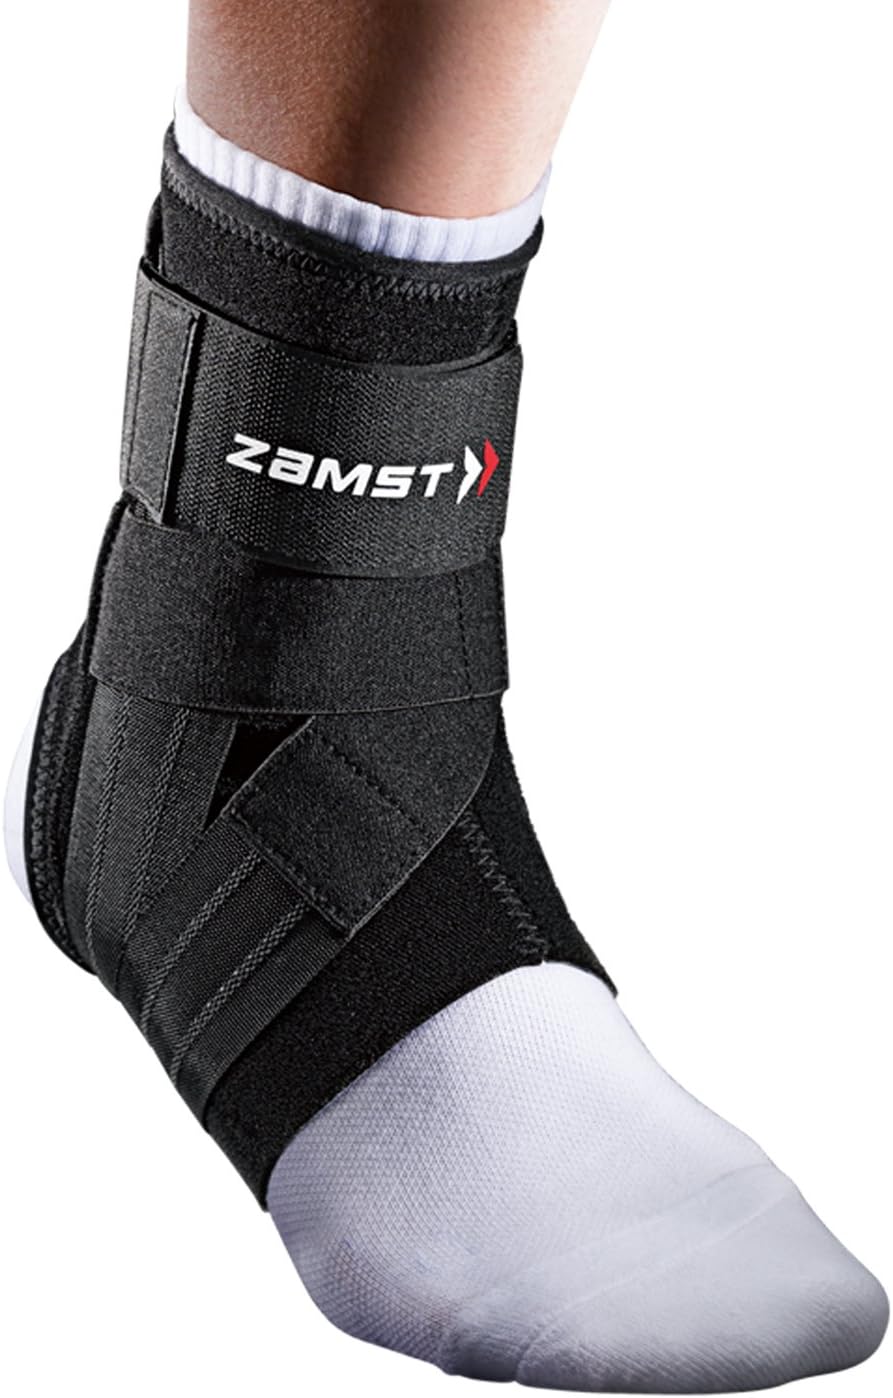 Zamst A1 Sports Ankle Brace For Moderate Lateral Ankle Sprain - Right Foot - Small